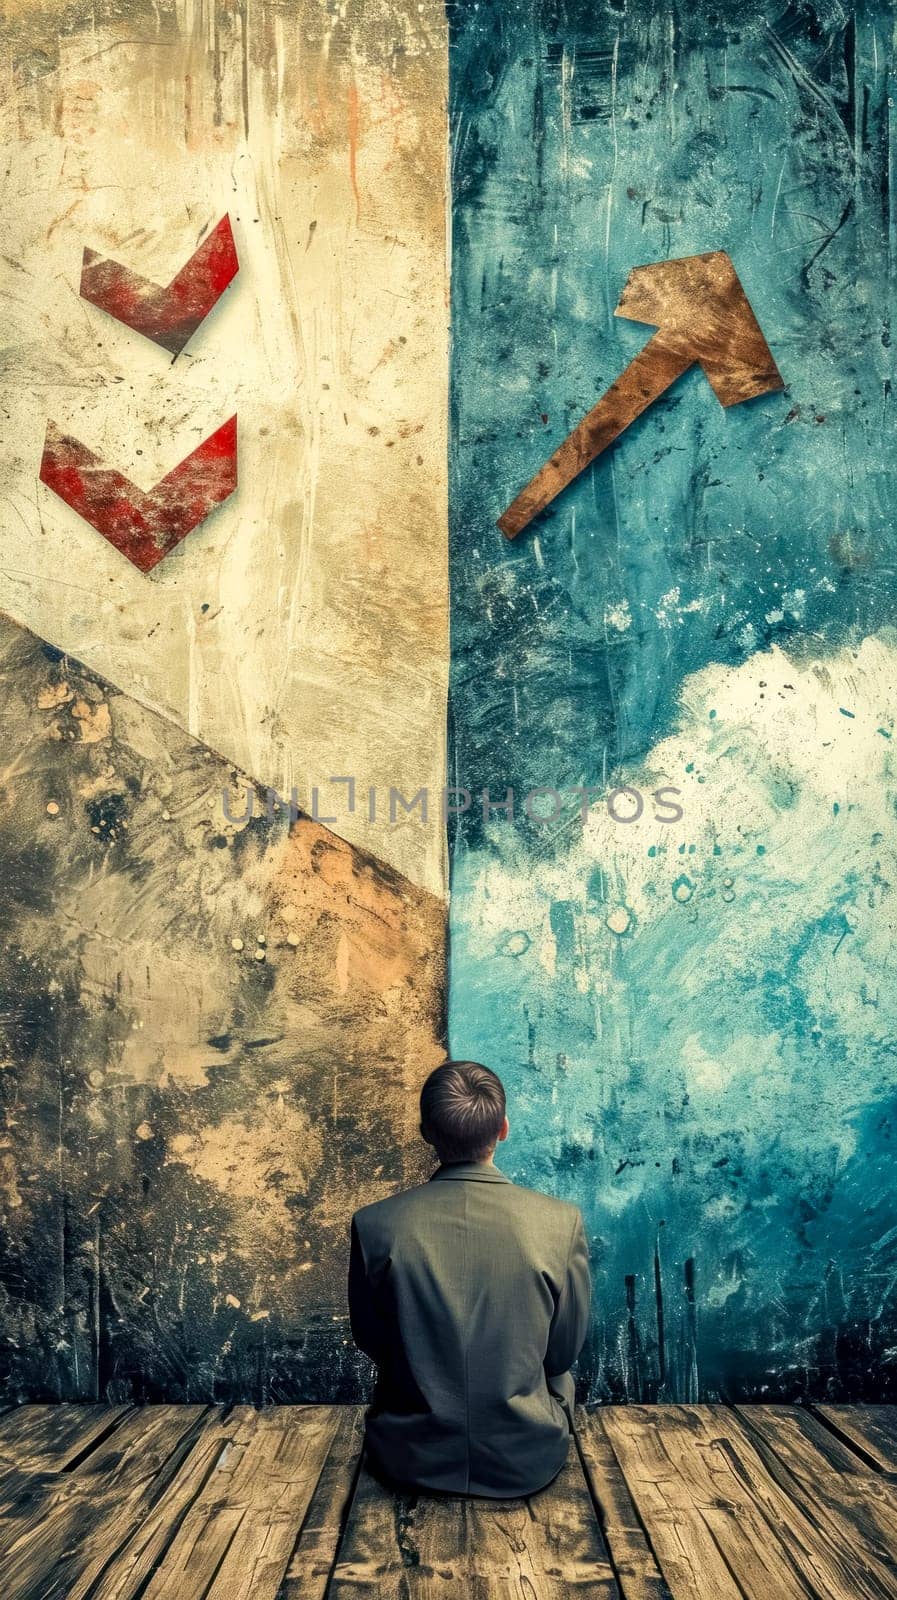 seated person in contemplation, facing a wall split between two contrasting sides, one with red downward arrows, suggesting decision-making and direction by Edophoto